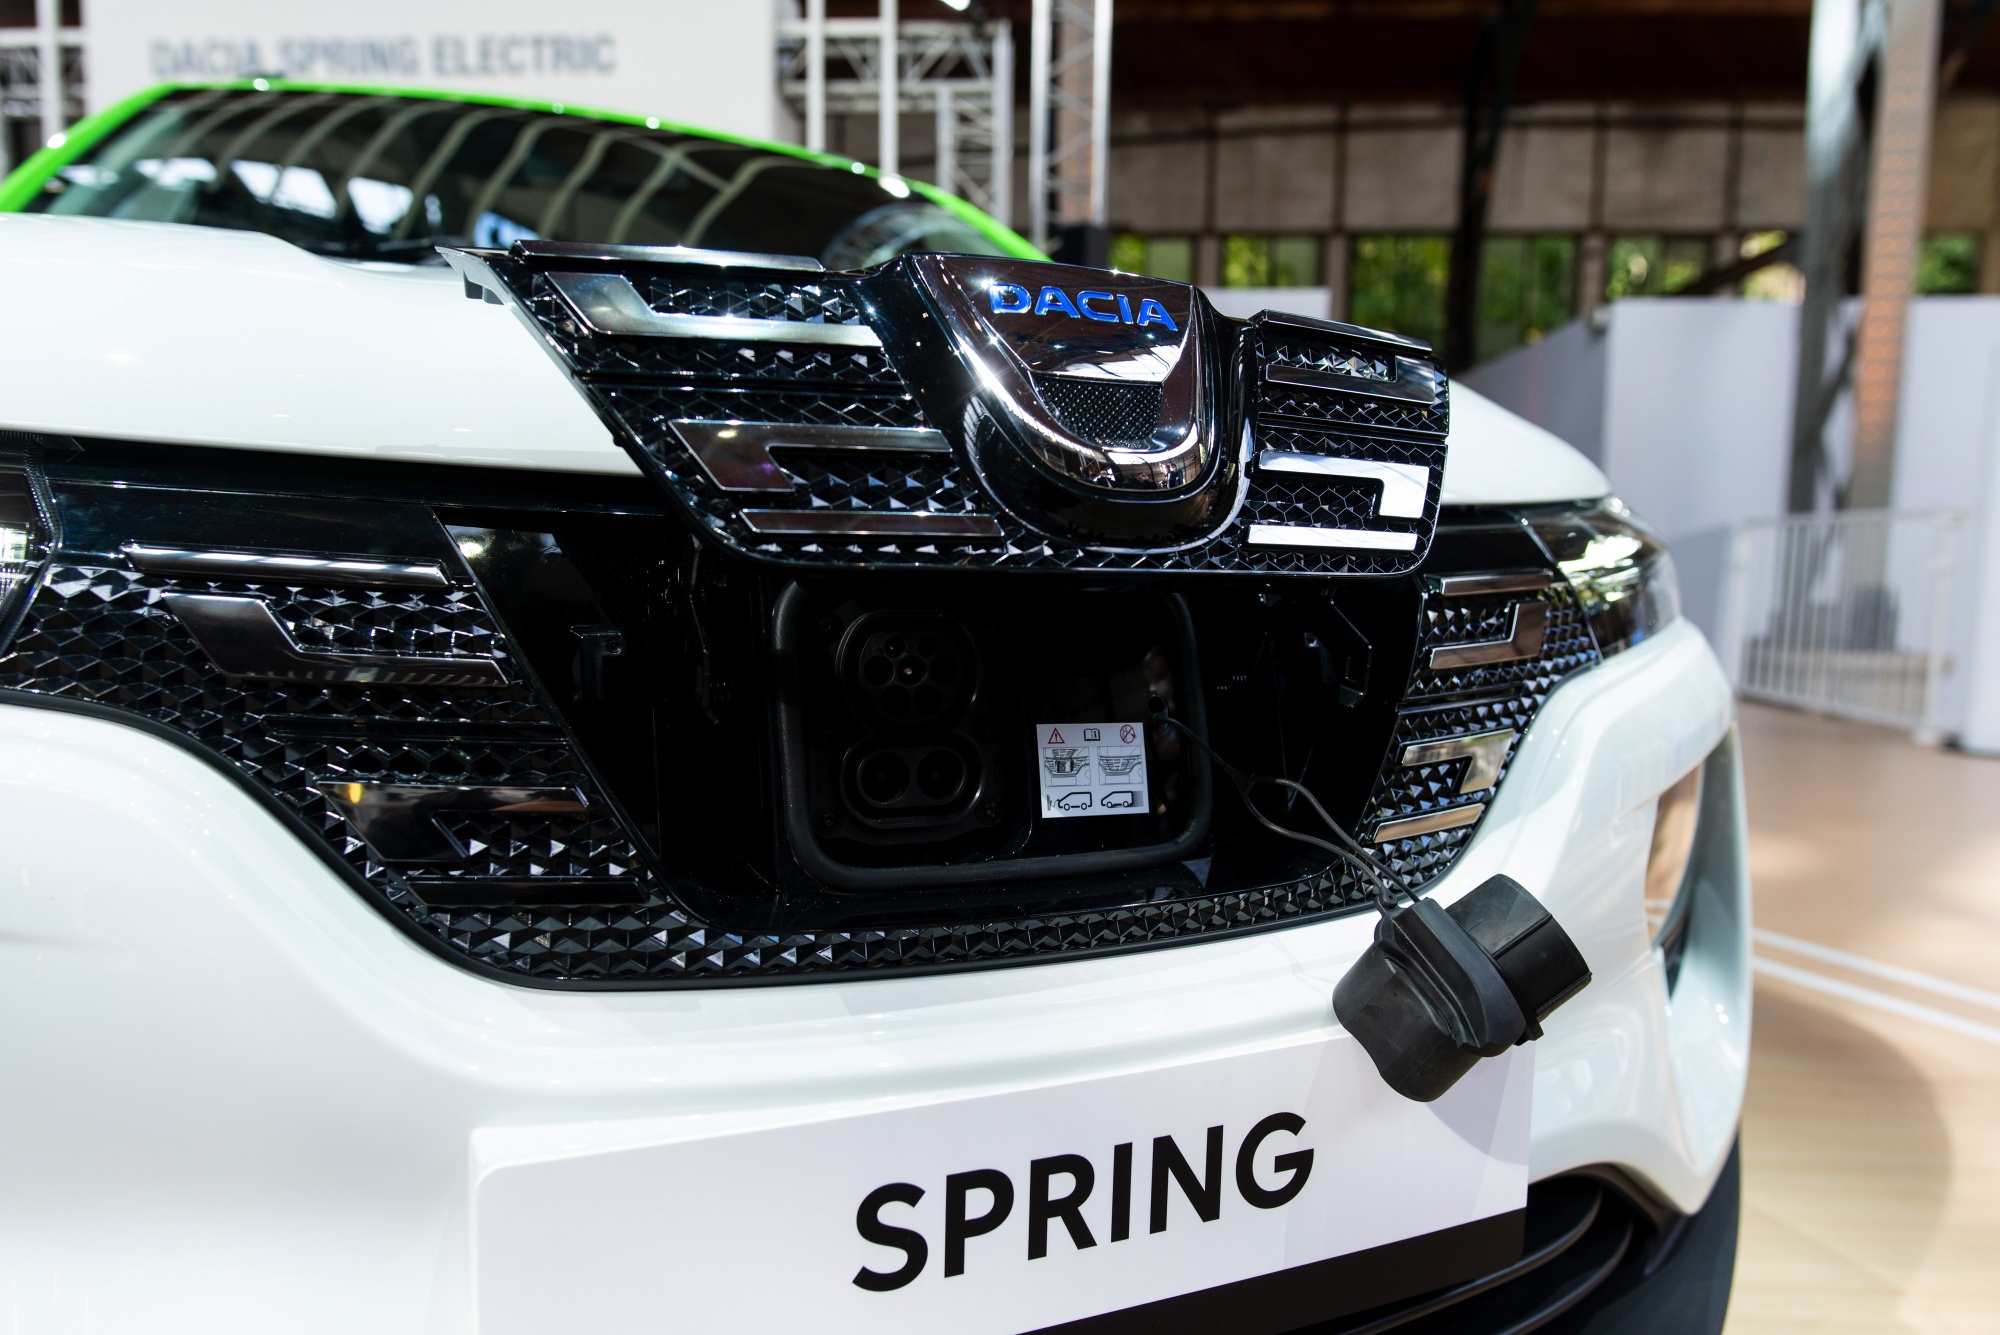 Electric vehicle Dacia Spring: How does it work?